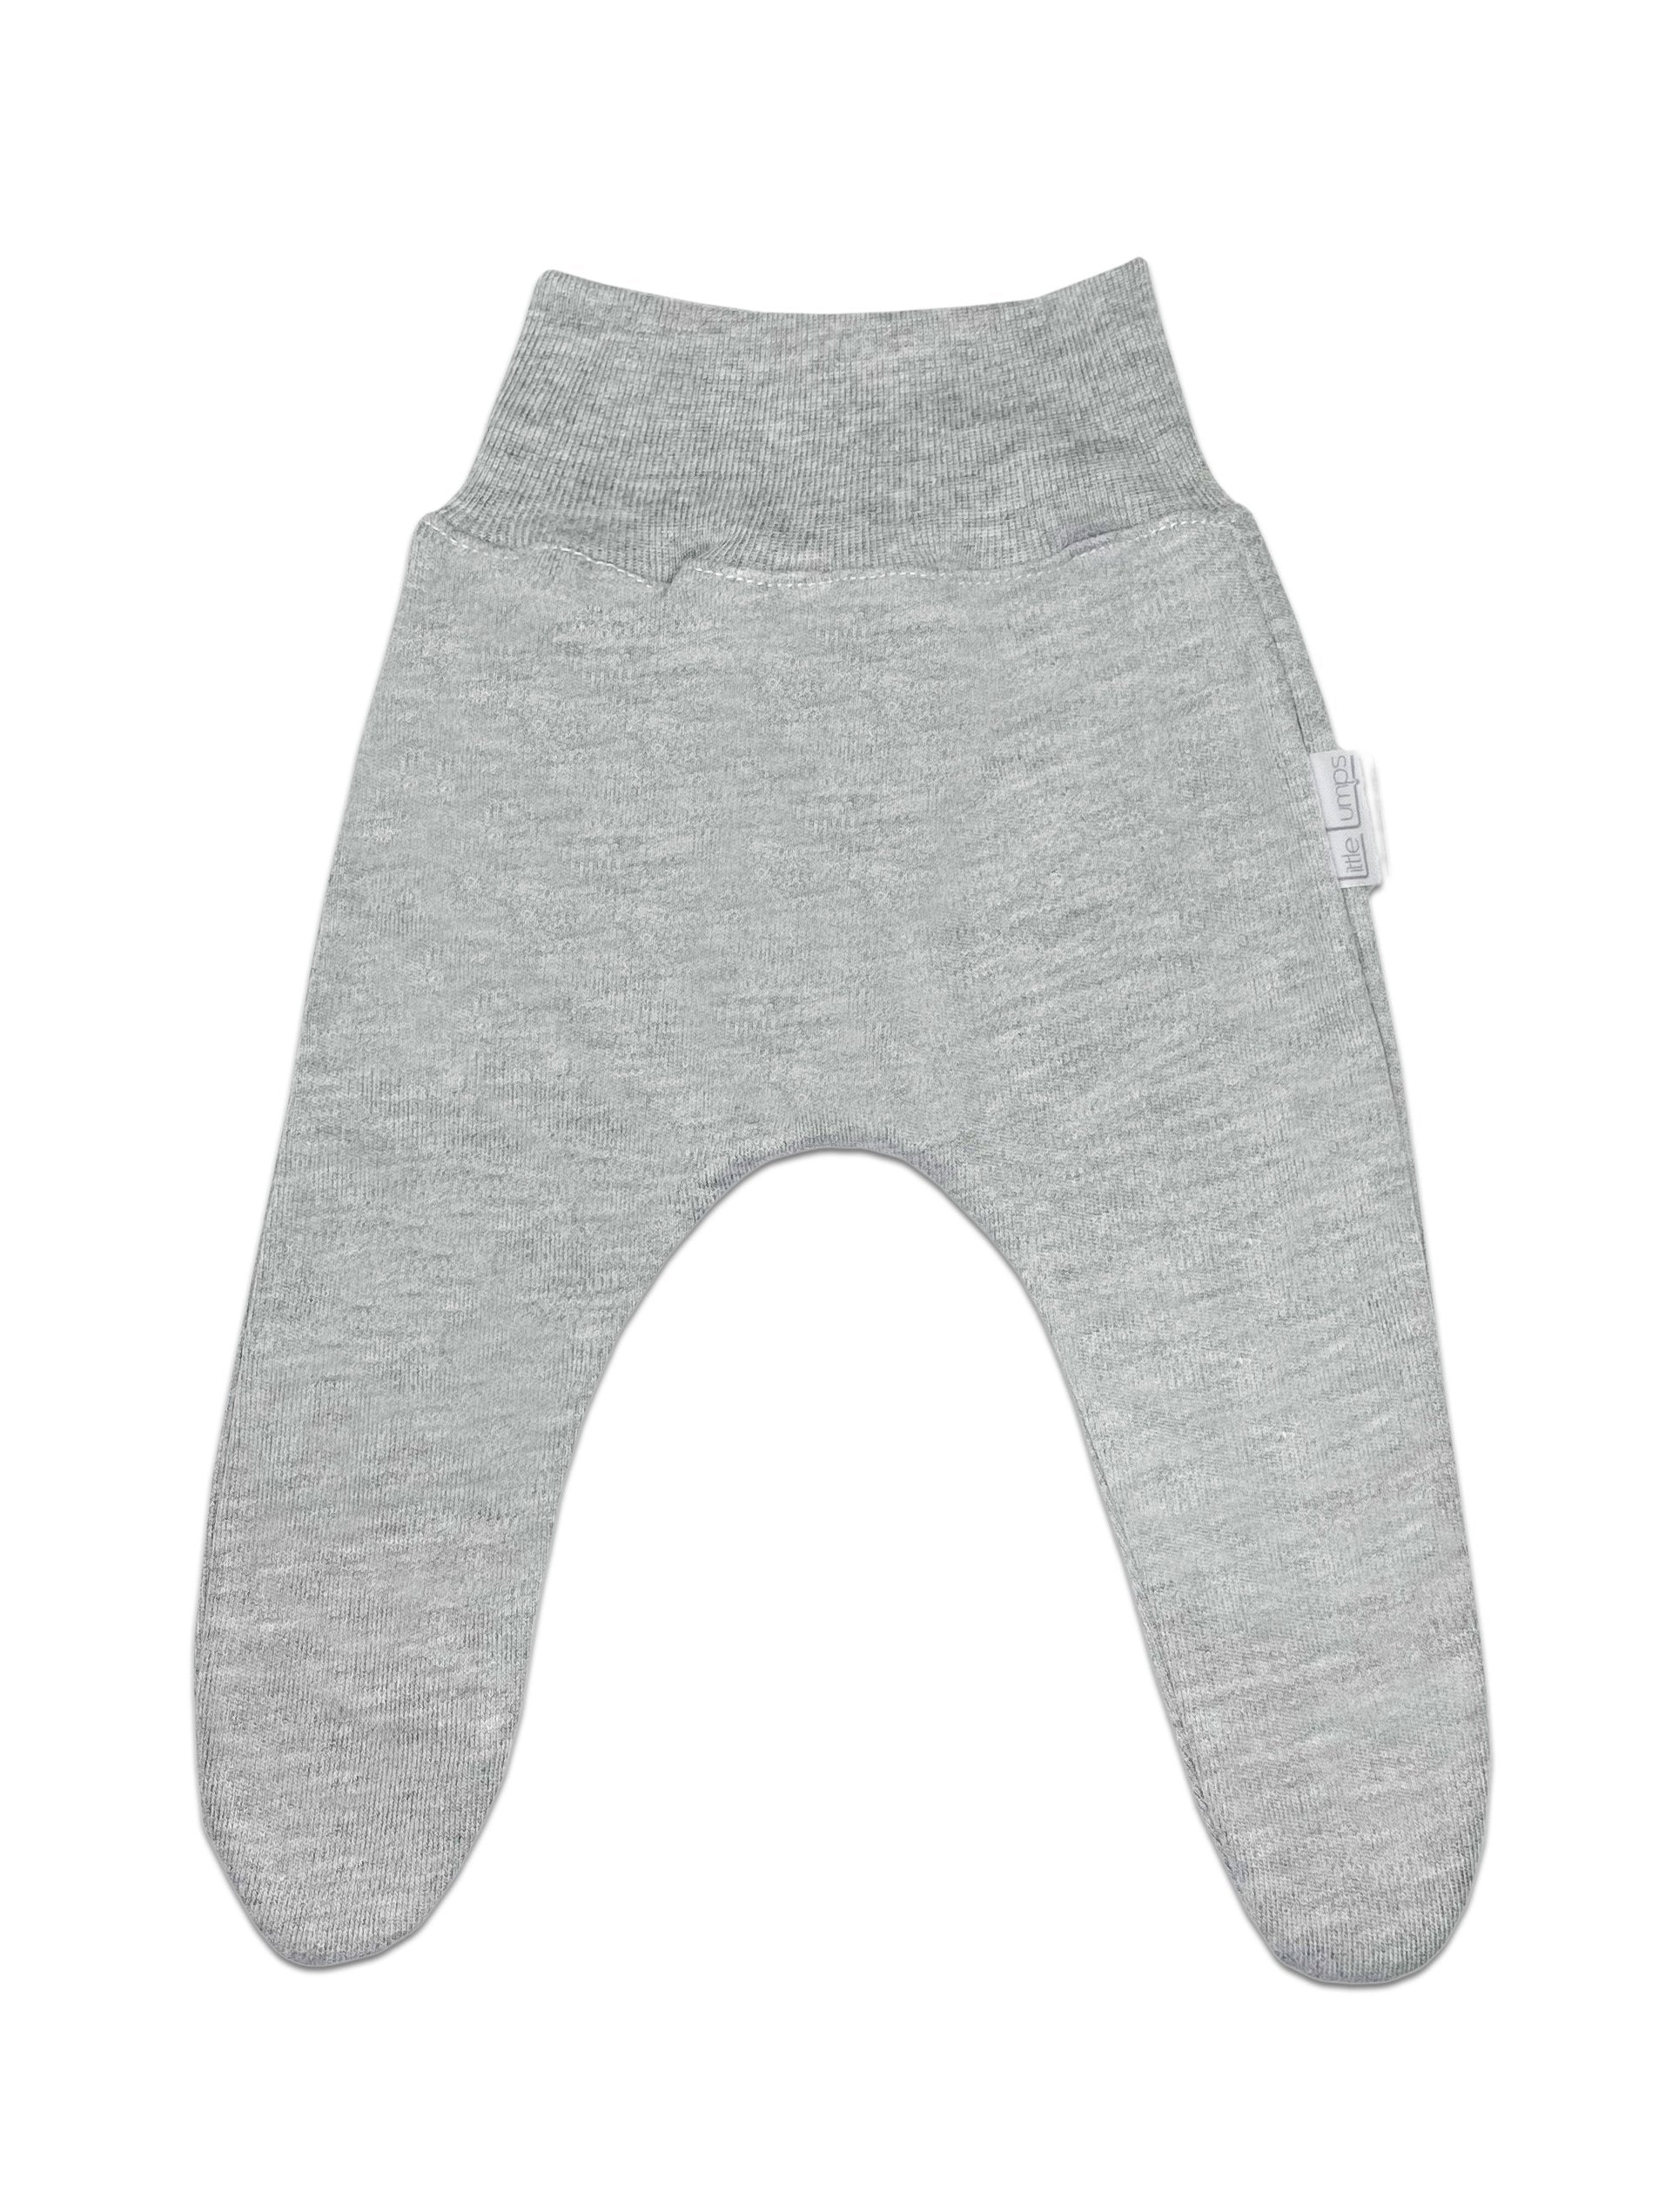 100% Cotton Footed Leggings - Grey Trousers / Leggings Little Lumps 